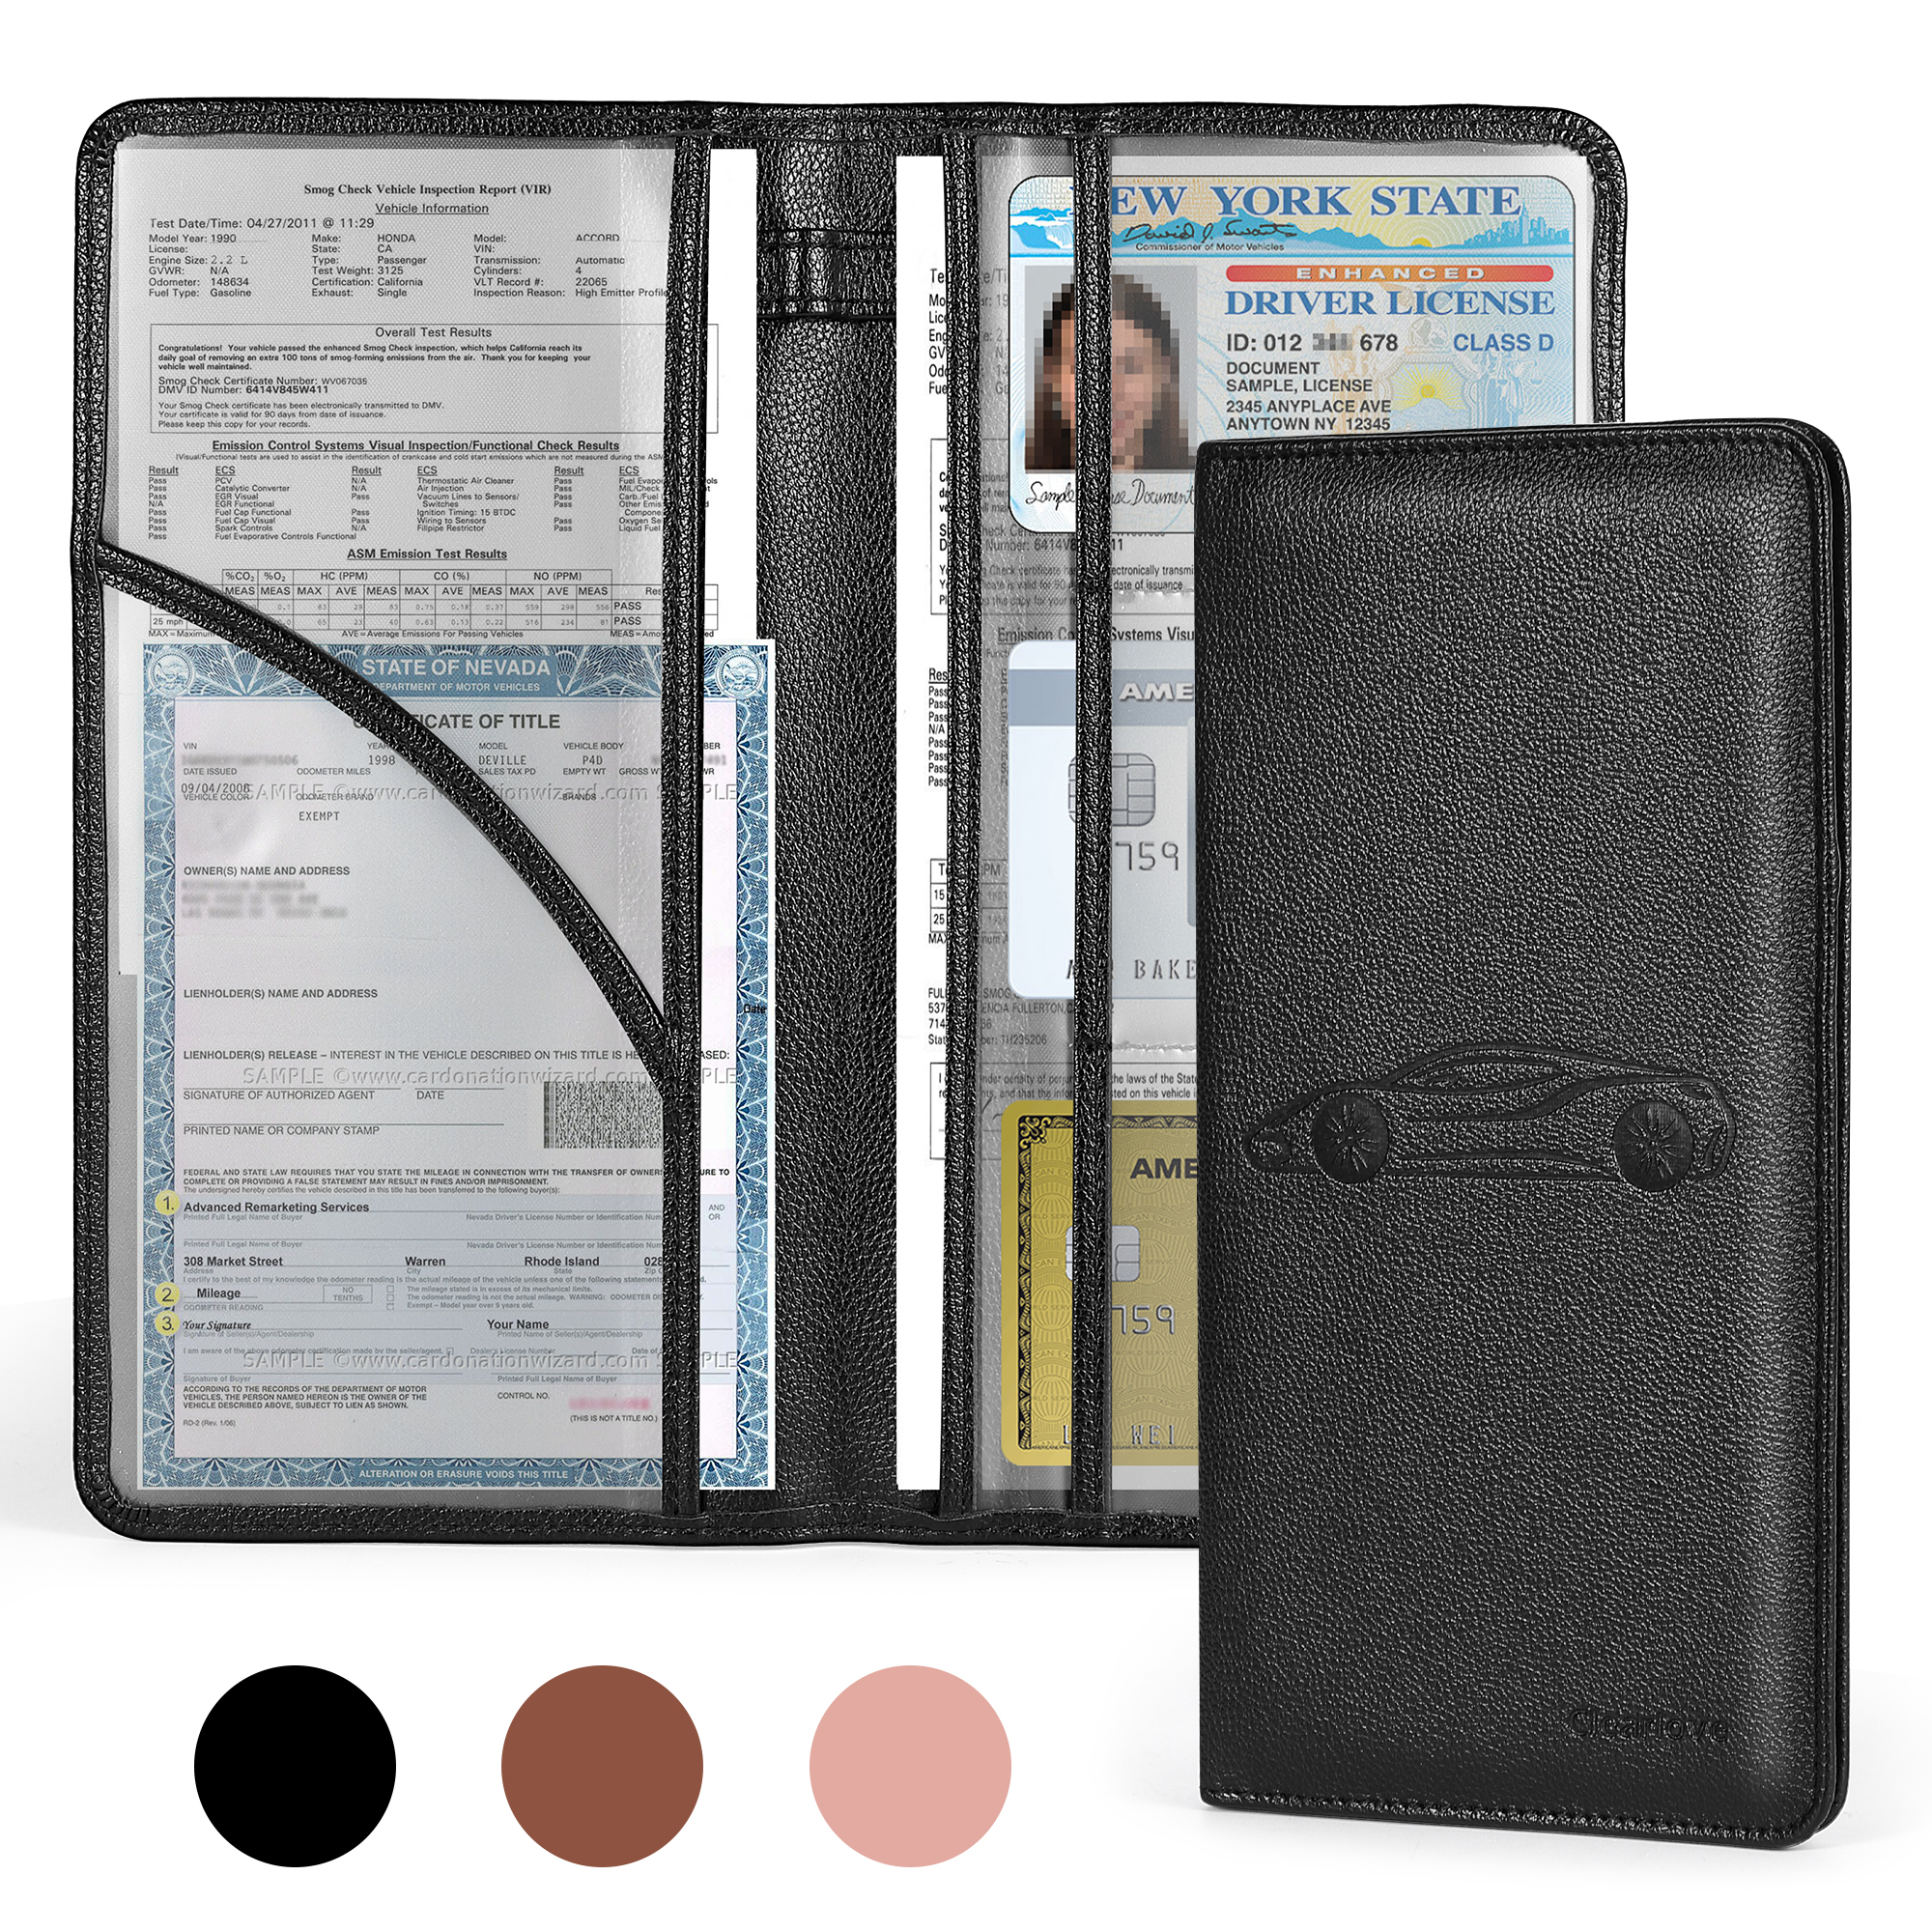 CANOPUS Car Registration and Insurance Holder, Car Document Holder, Vehicle  Registration and Insurance Card Holder, Wallet Vehicle Paperwork Organizer  (2 Pack), JEEP 